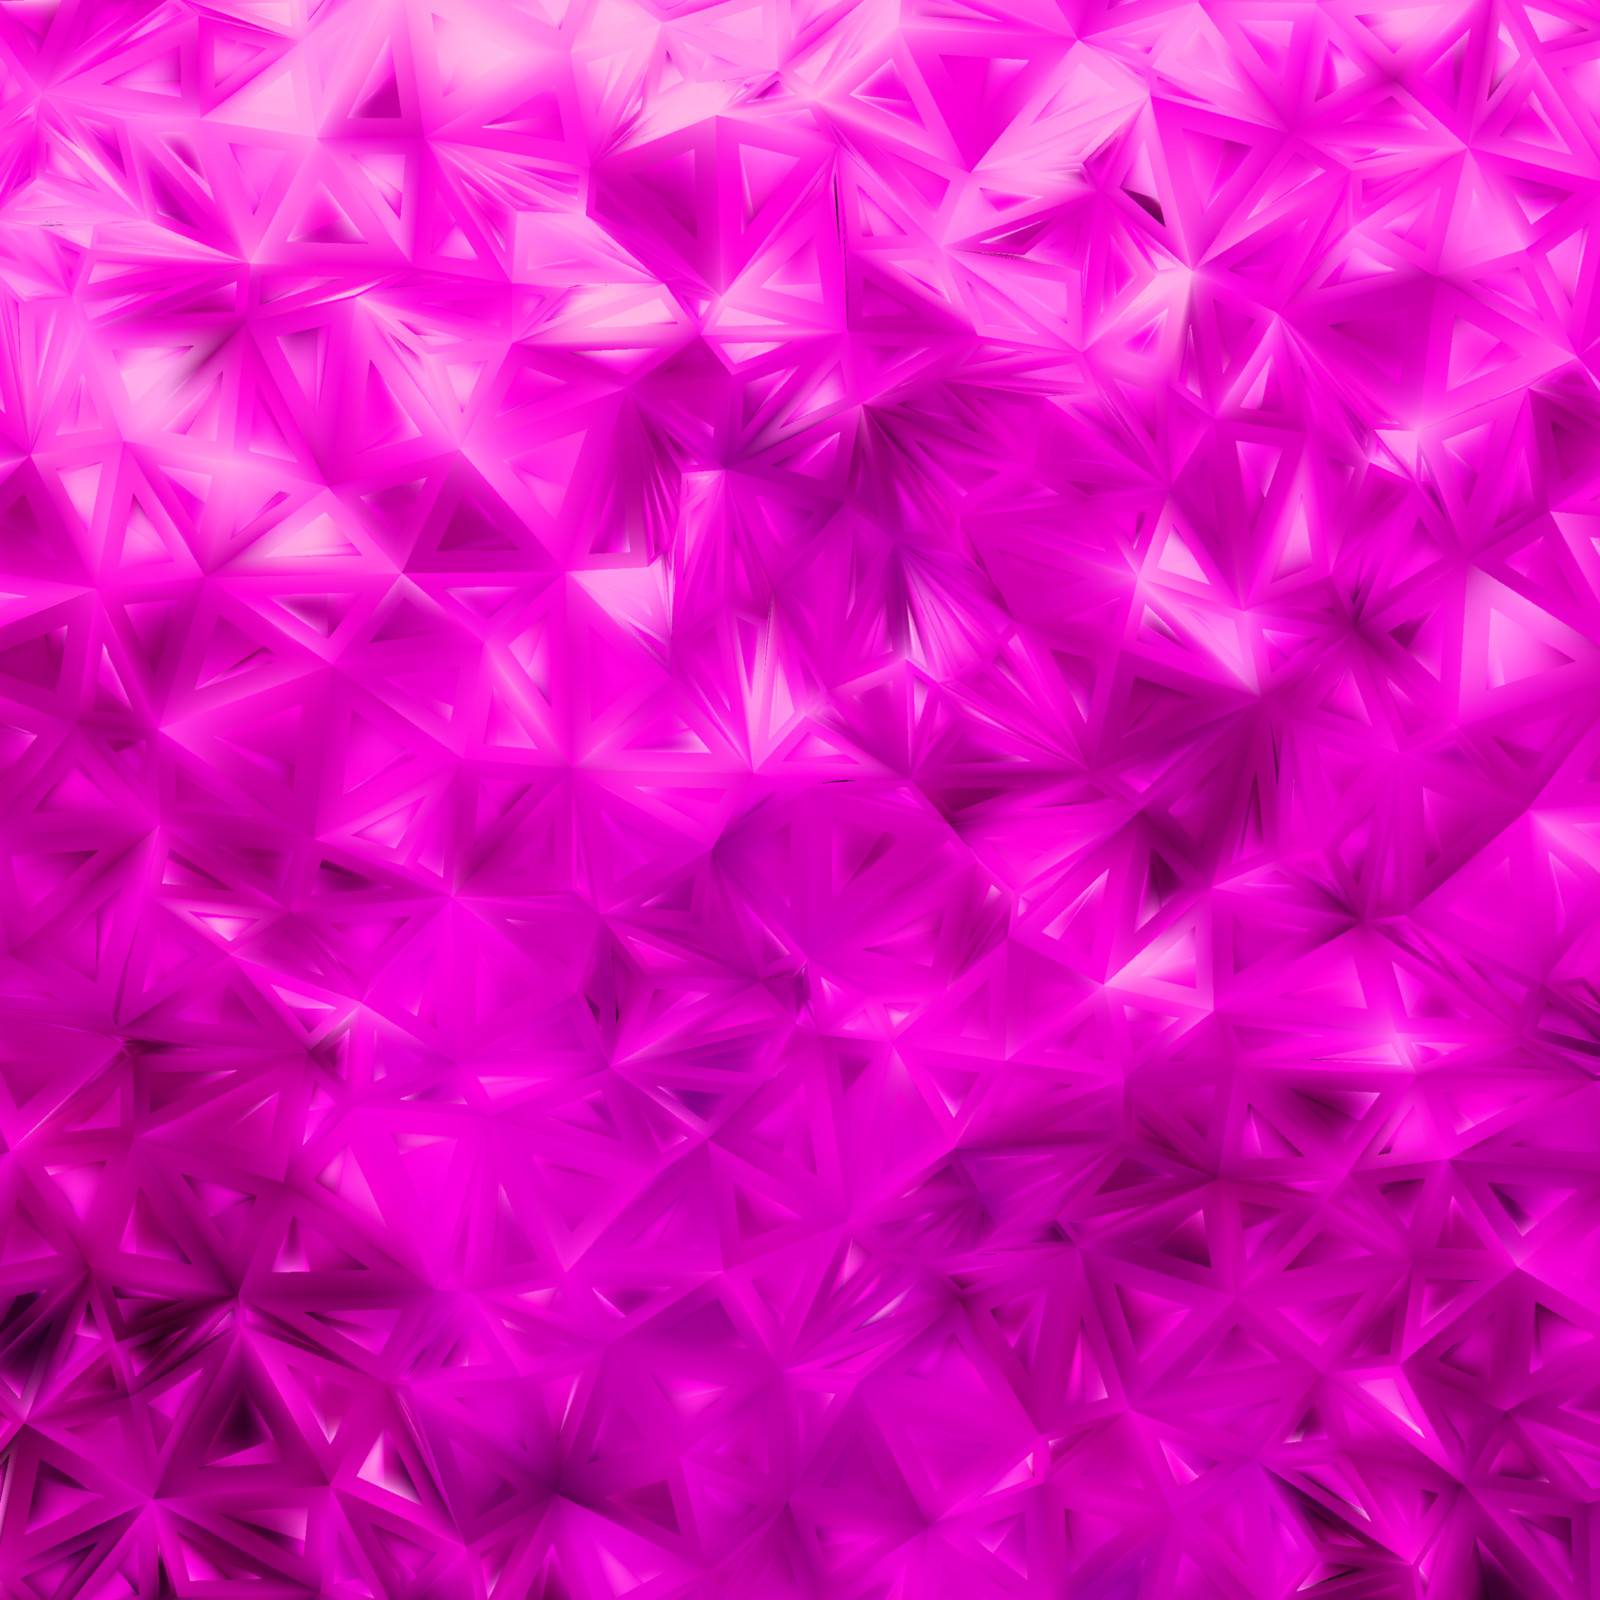 Glow purple mosaic background. EPS 8 vector file included